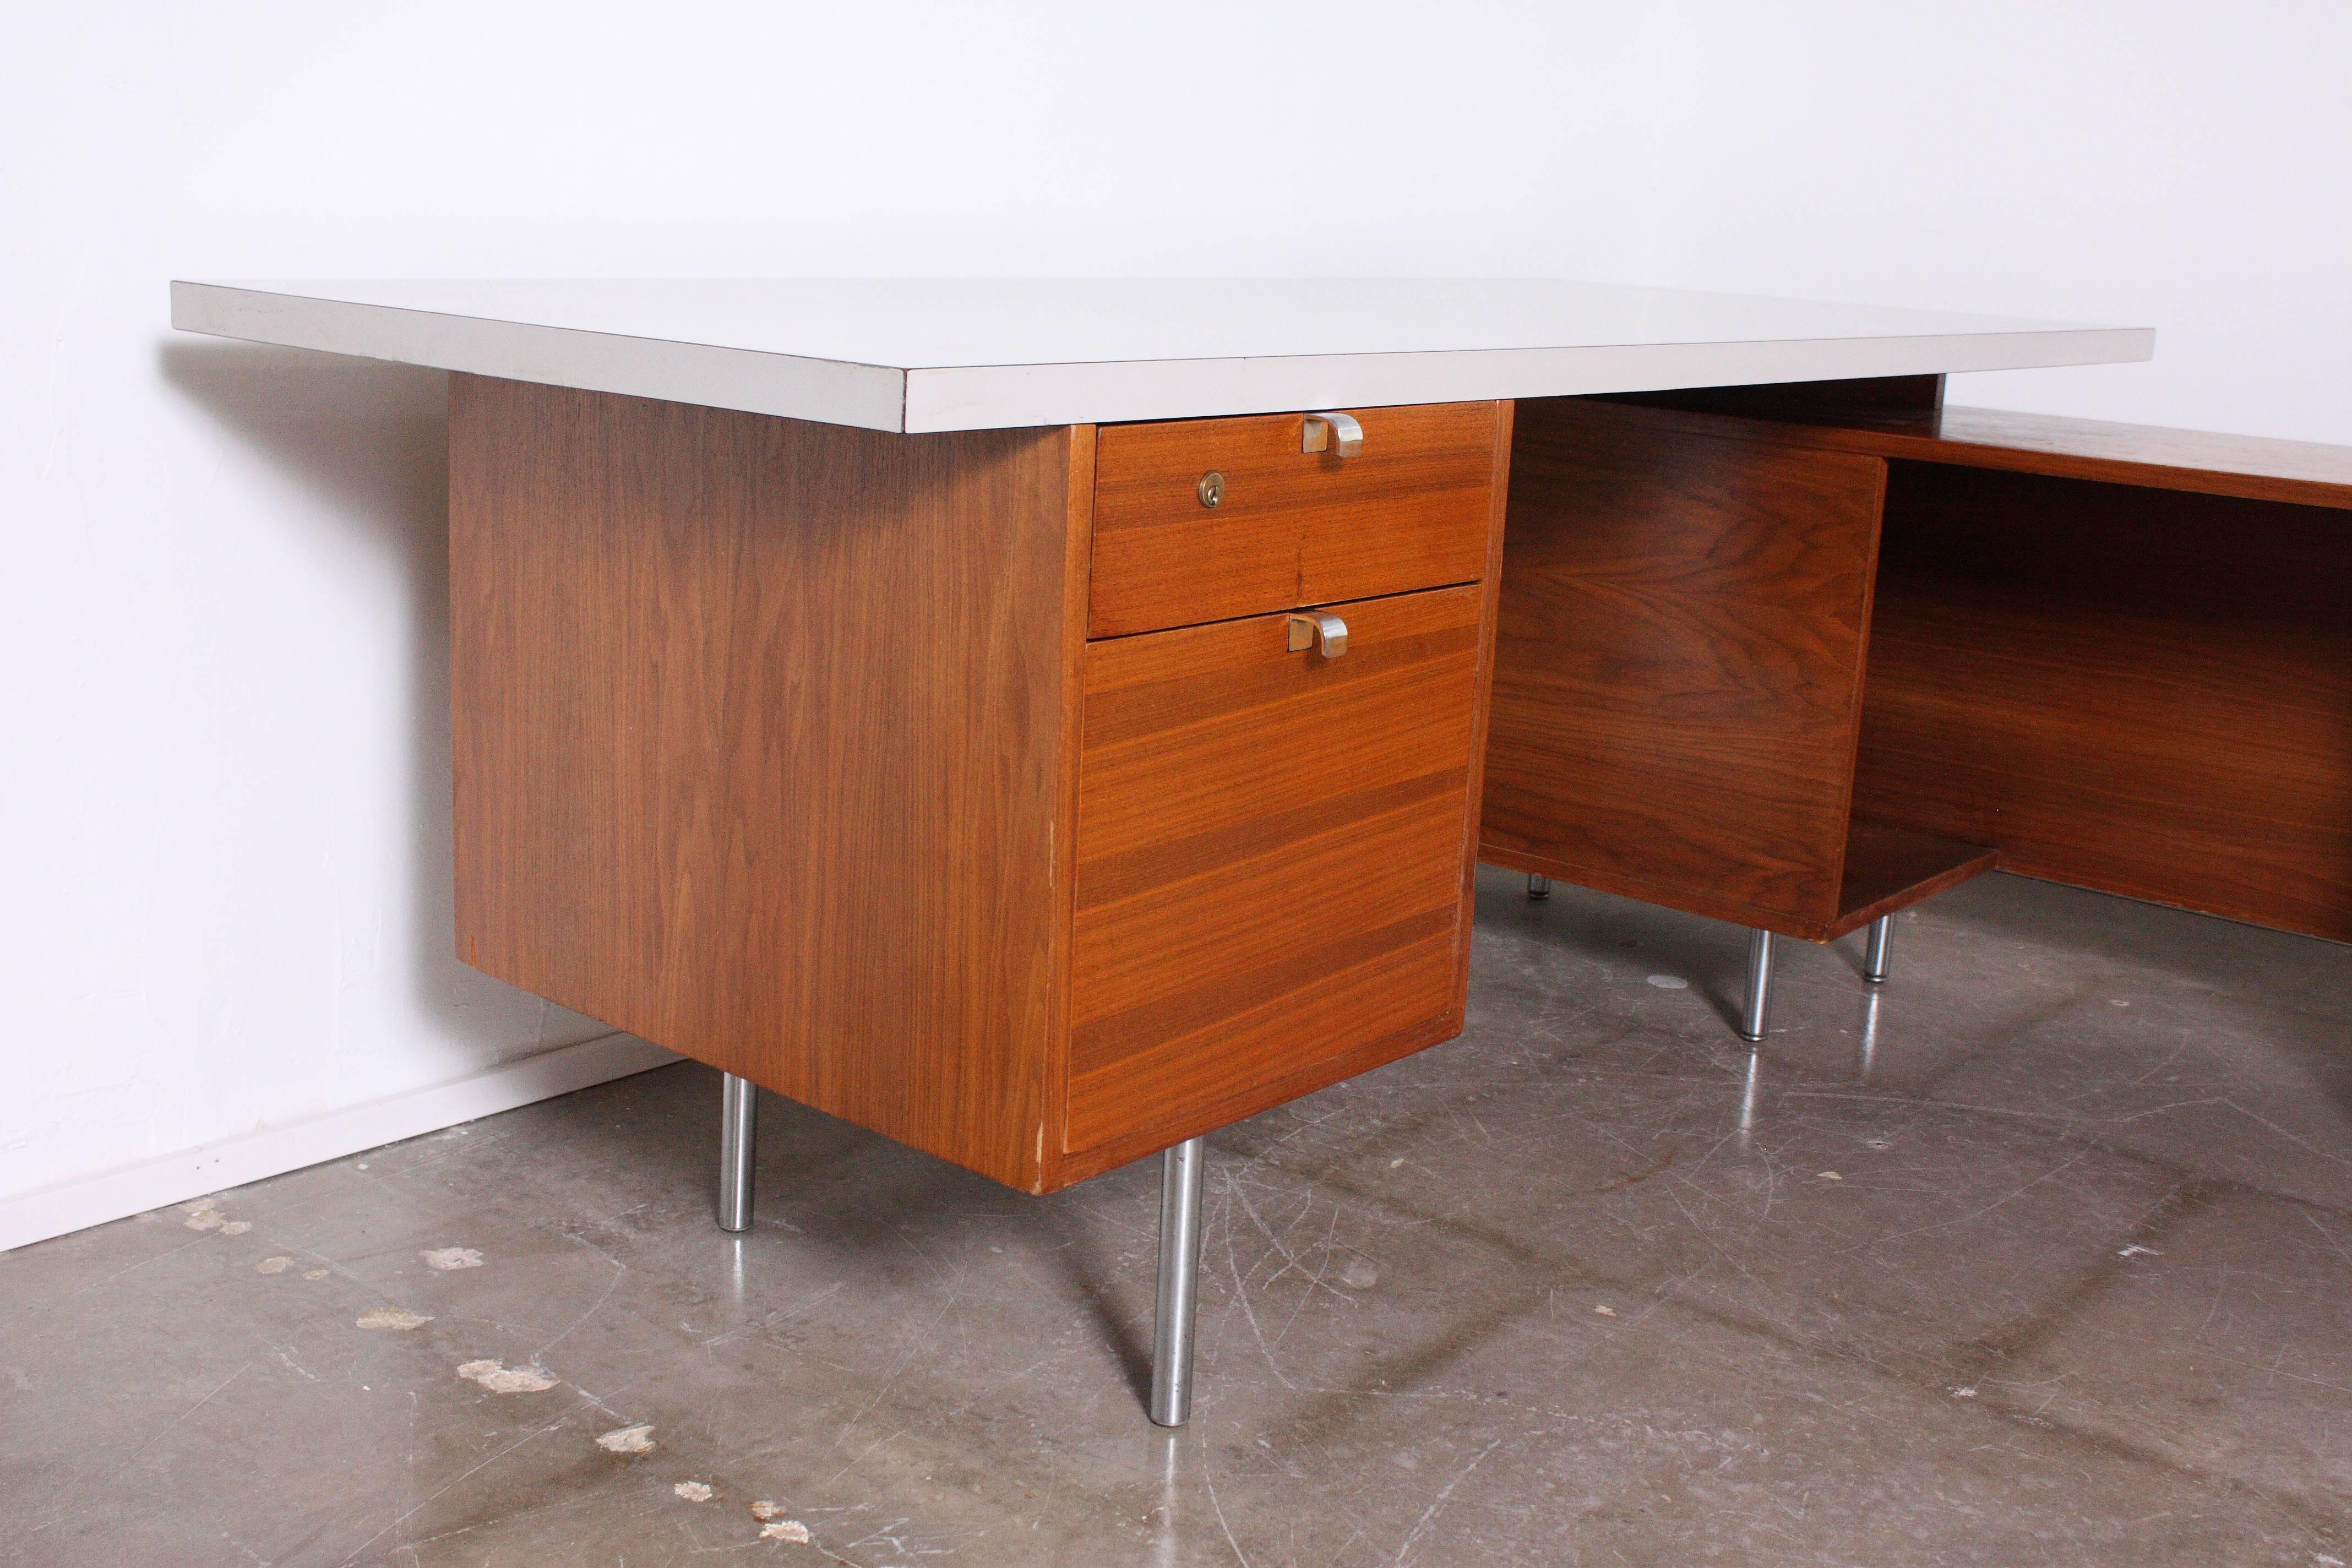 Executive desk by George Nelson for Herman Miller with return and light grey formica style top. Desk sits on steel tubular legs. Six drawers and cabinet with shelf for storage. 

Desk top measures 72